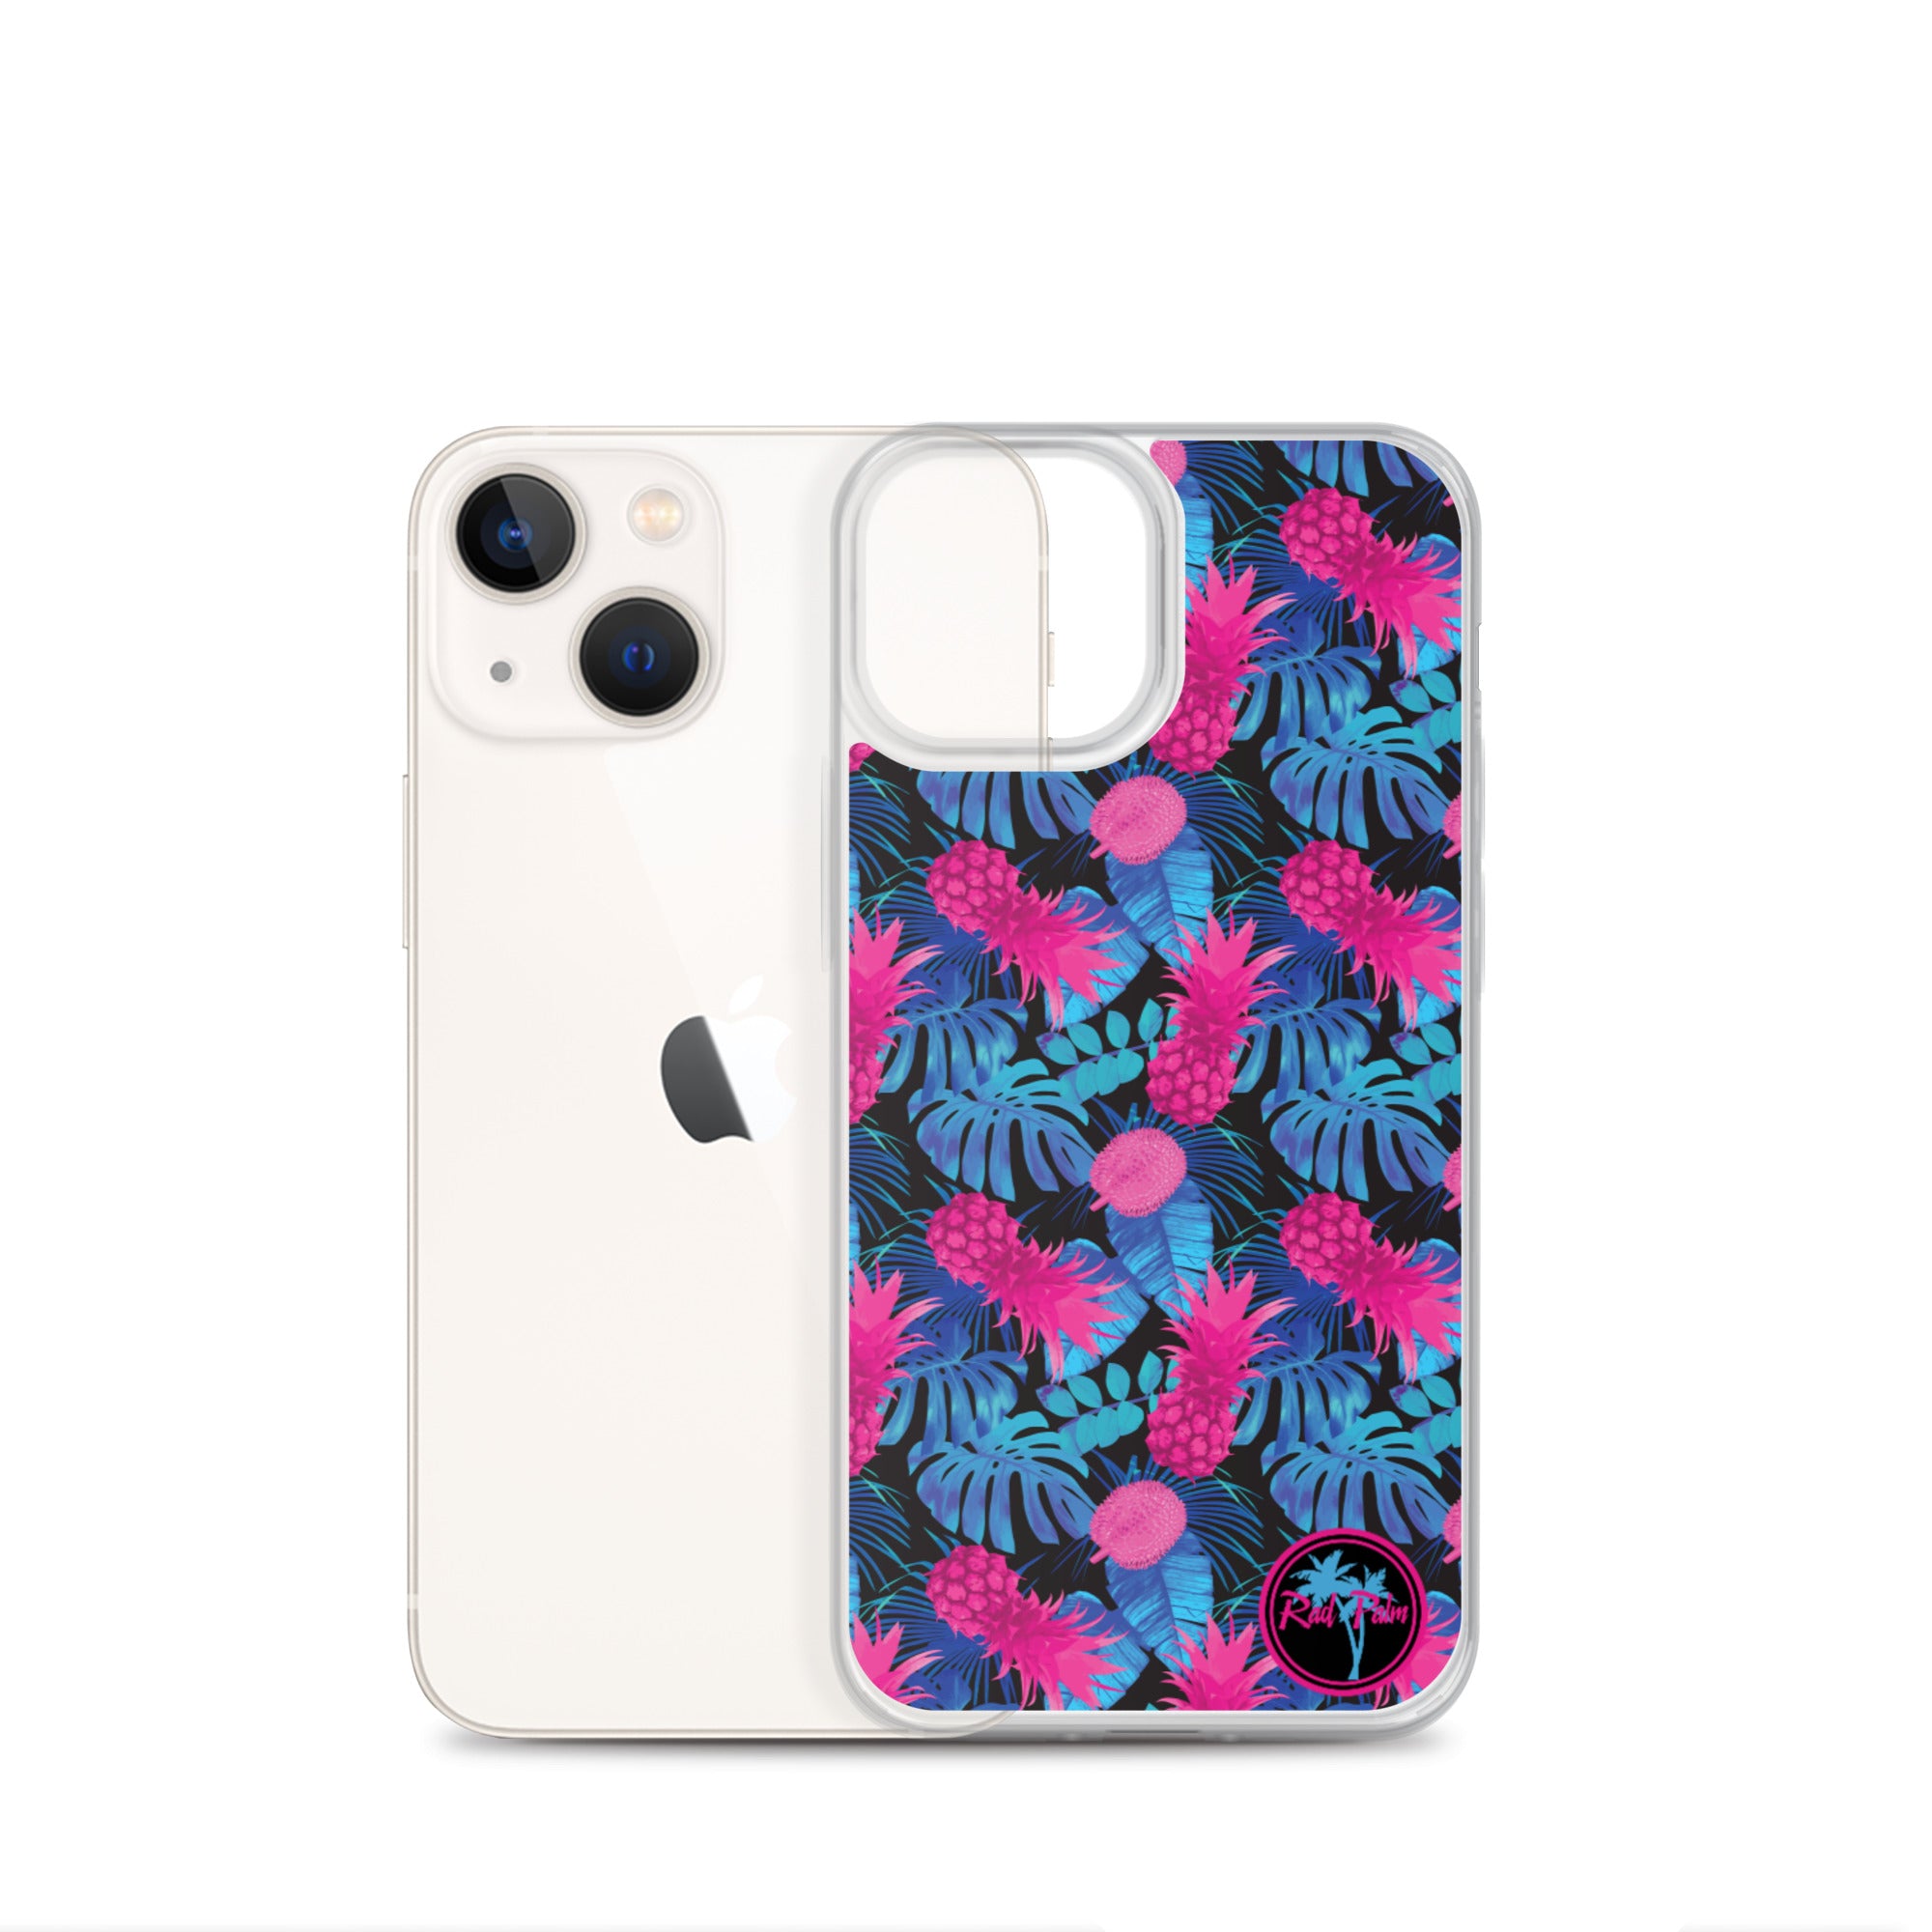 Pineapple Express iPhone Case